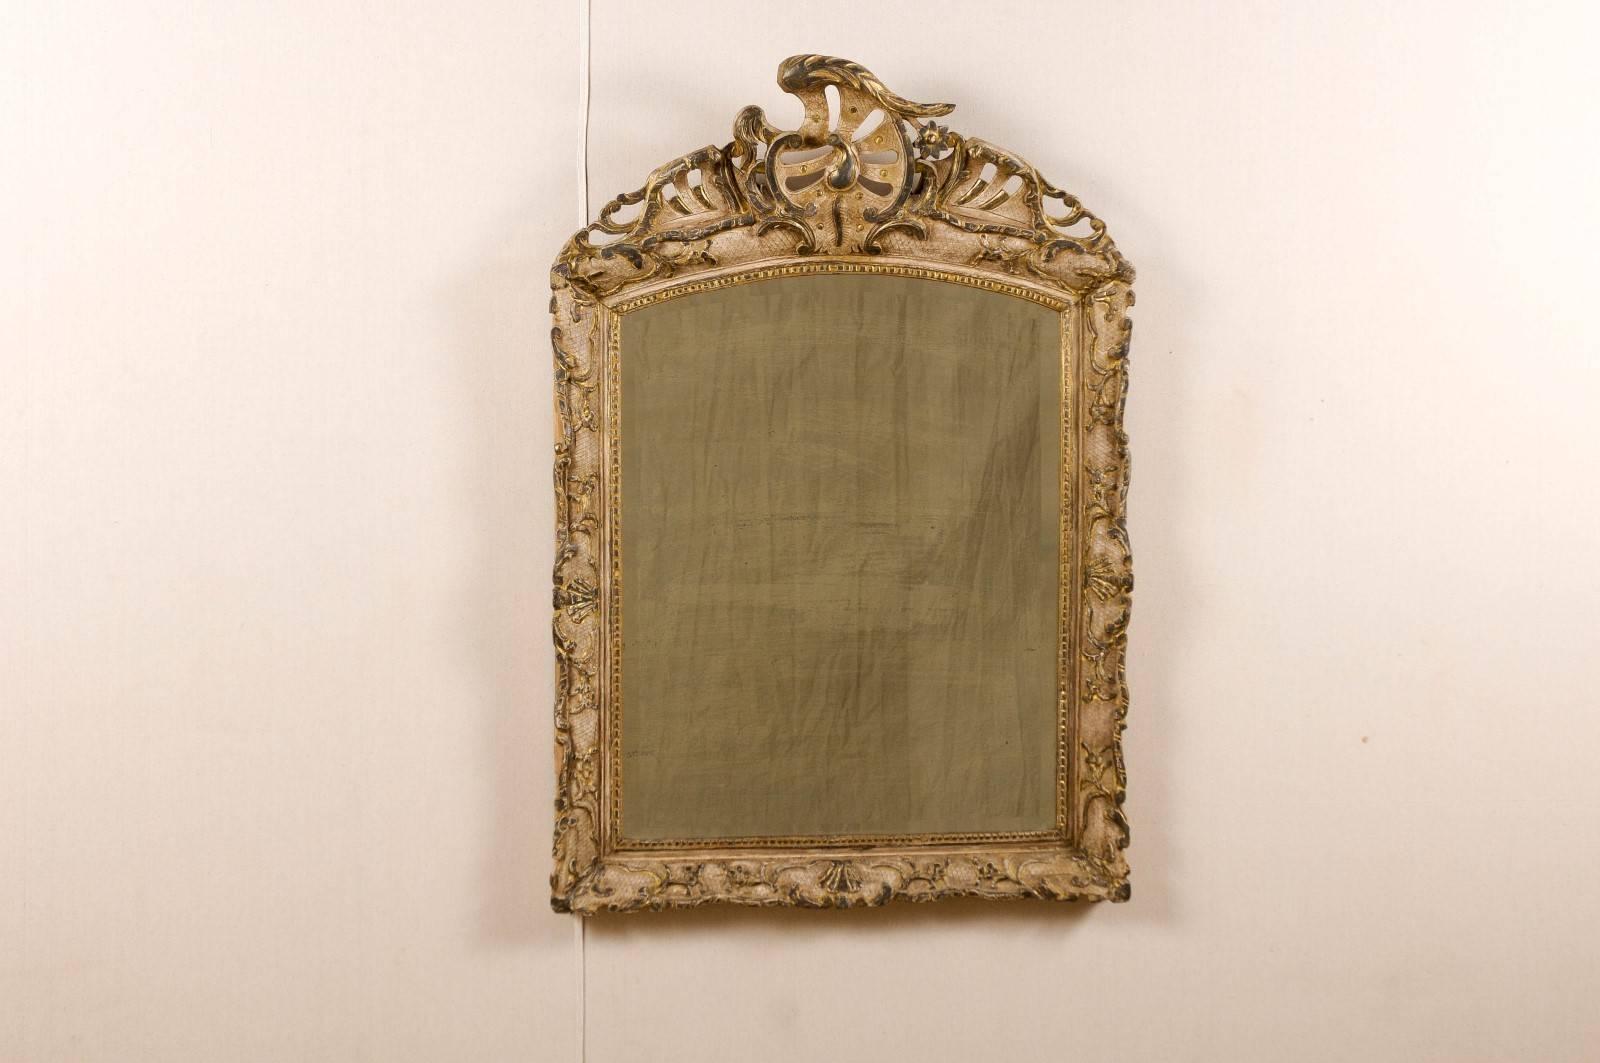 An Italian Rococo style painted and gilded wood mirror from the early 19th century. This Italian mirror features a grooved frame with a nicely carved crest, decorated with various scroll motifs and delicate flower. The frame is also adorned with a